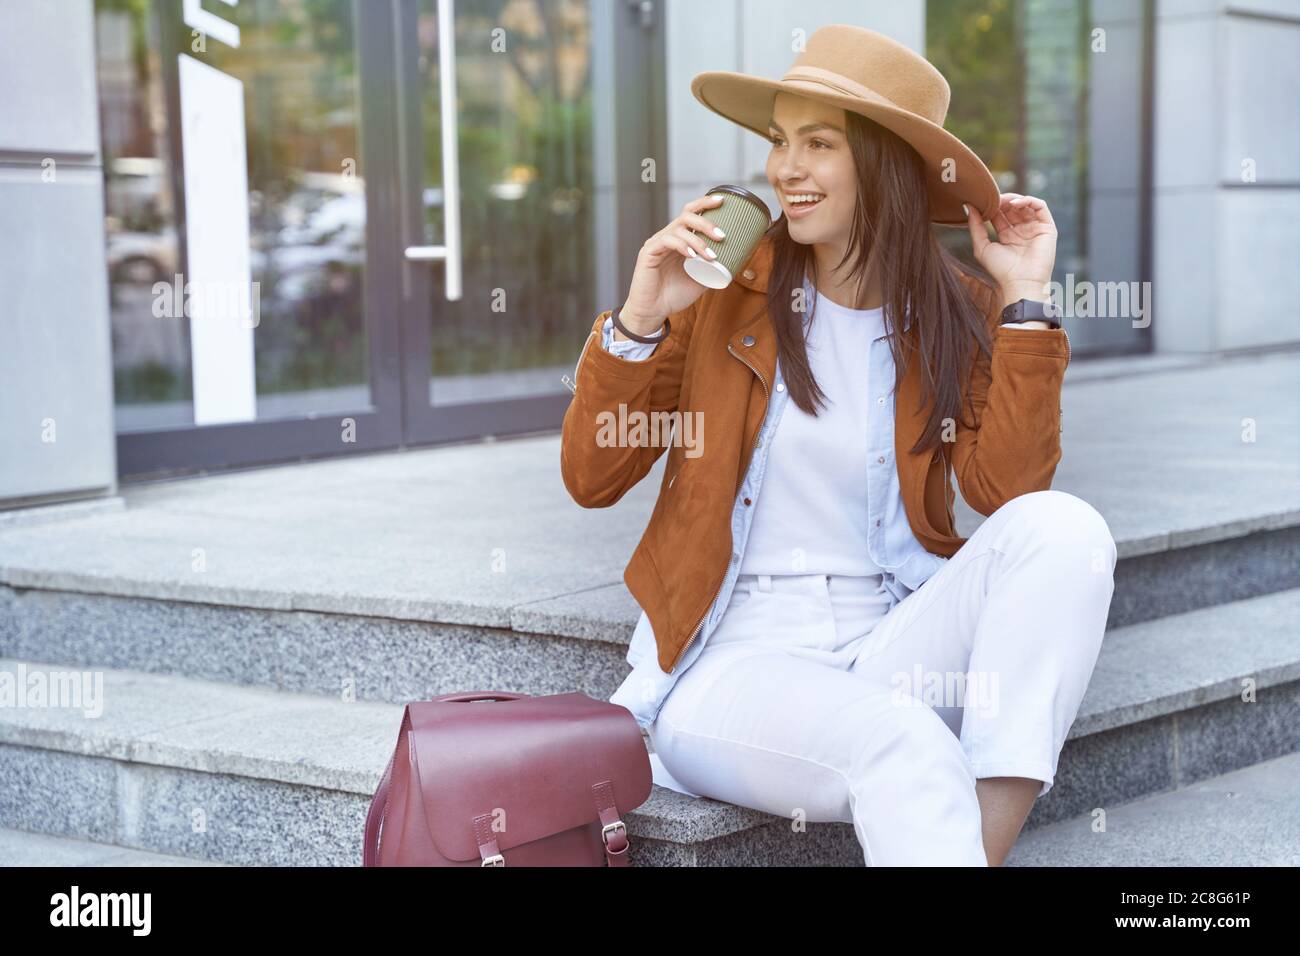 Enjoying vacation. Young and beautiful happy female traveler or tourist wearing hat and backpack drinking coffee and smiling while resting on city stairs. Travel and tourism concept Stock Photo